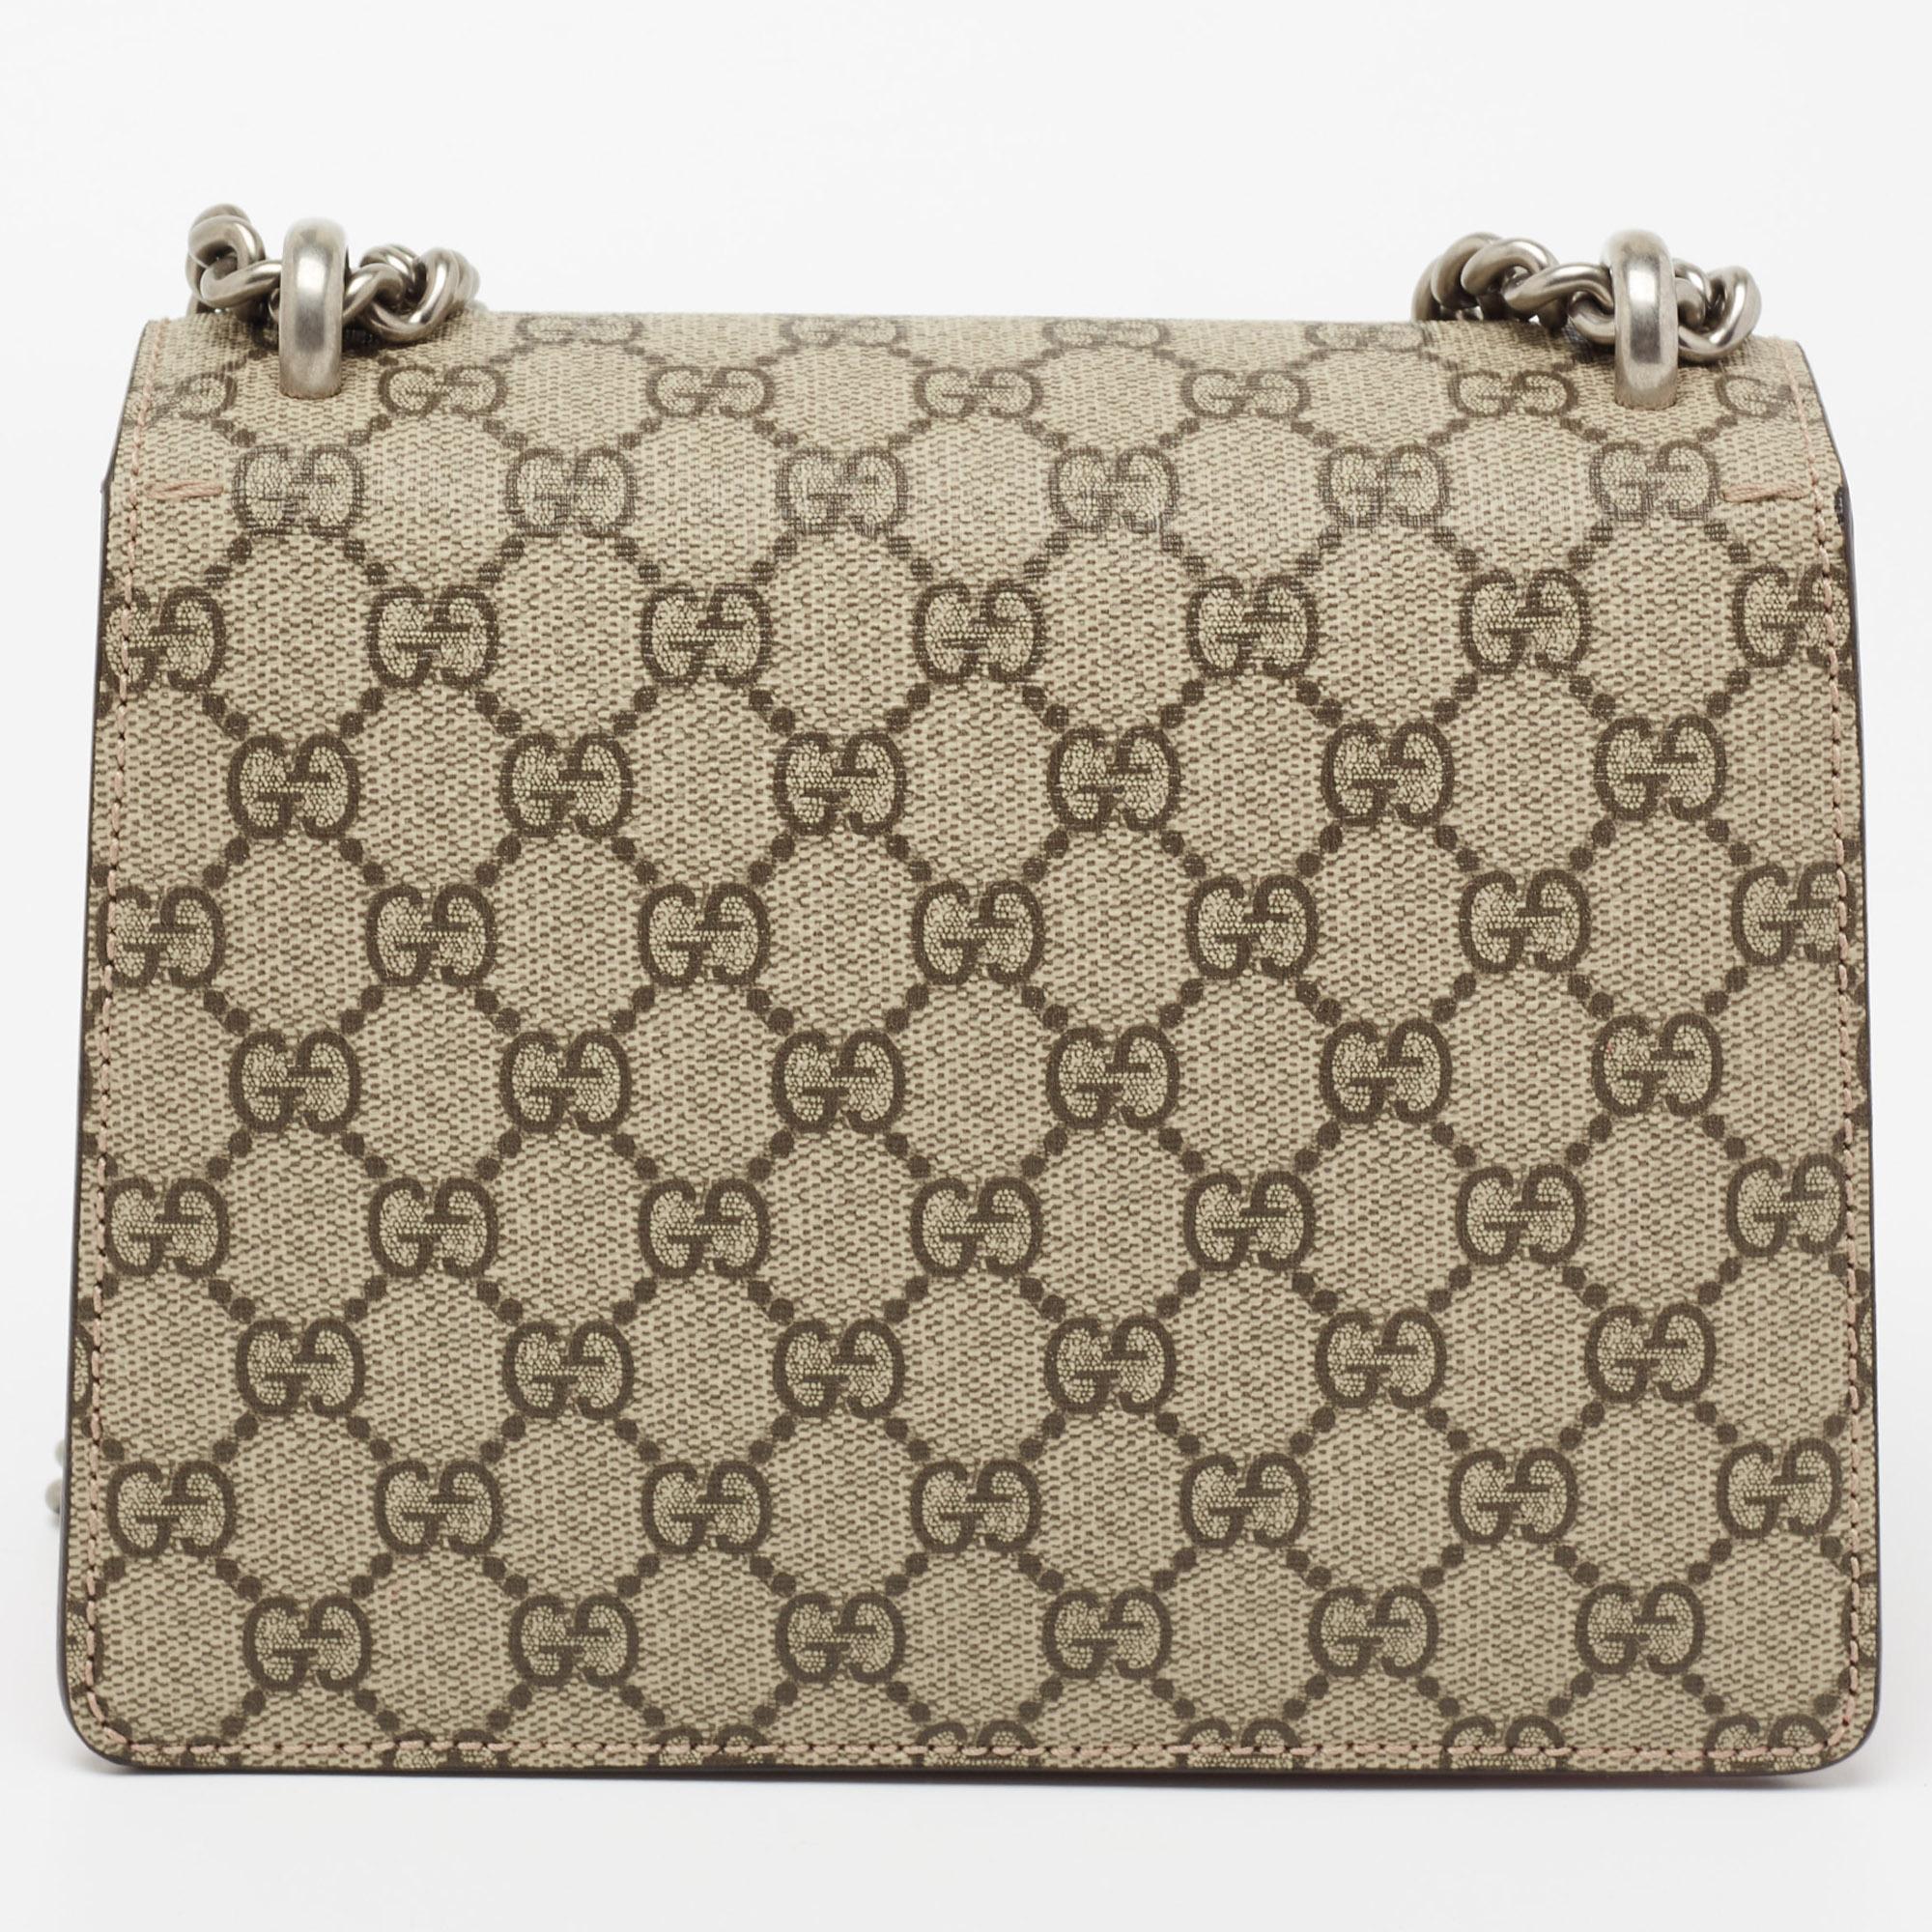 Gucci's Dionysus collection is inspired by the Greek God Dionysus, who is believed to have crossed the Tigris river on a tiger sent to him by Zeus. This creation has been beautifully made from GG coated canvas along with suede and beautifully merges